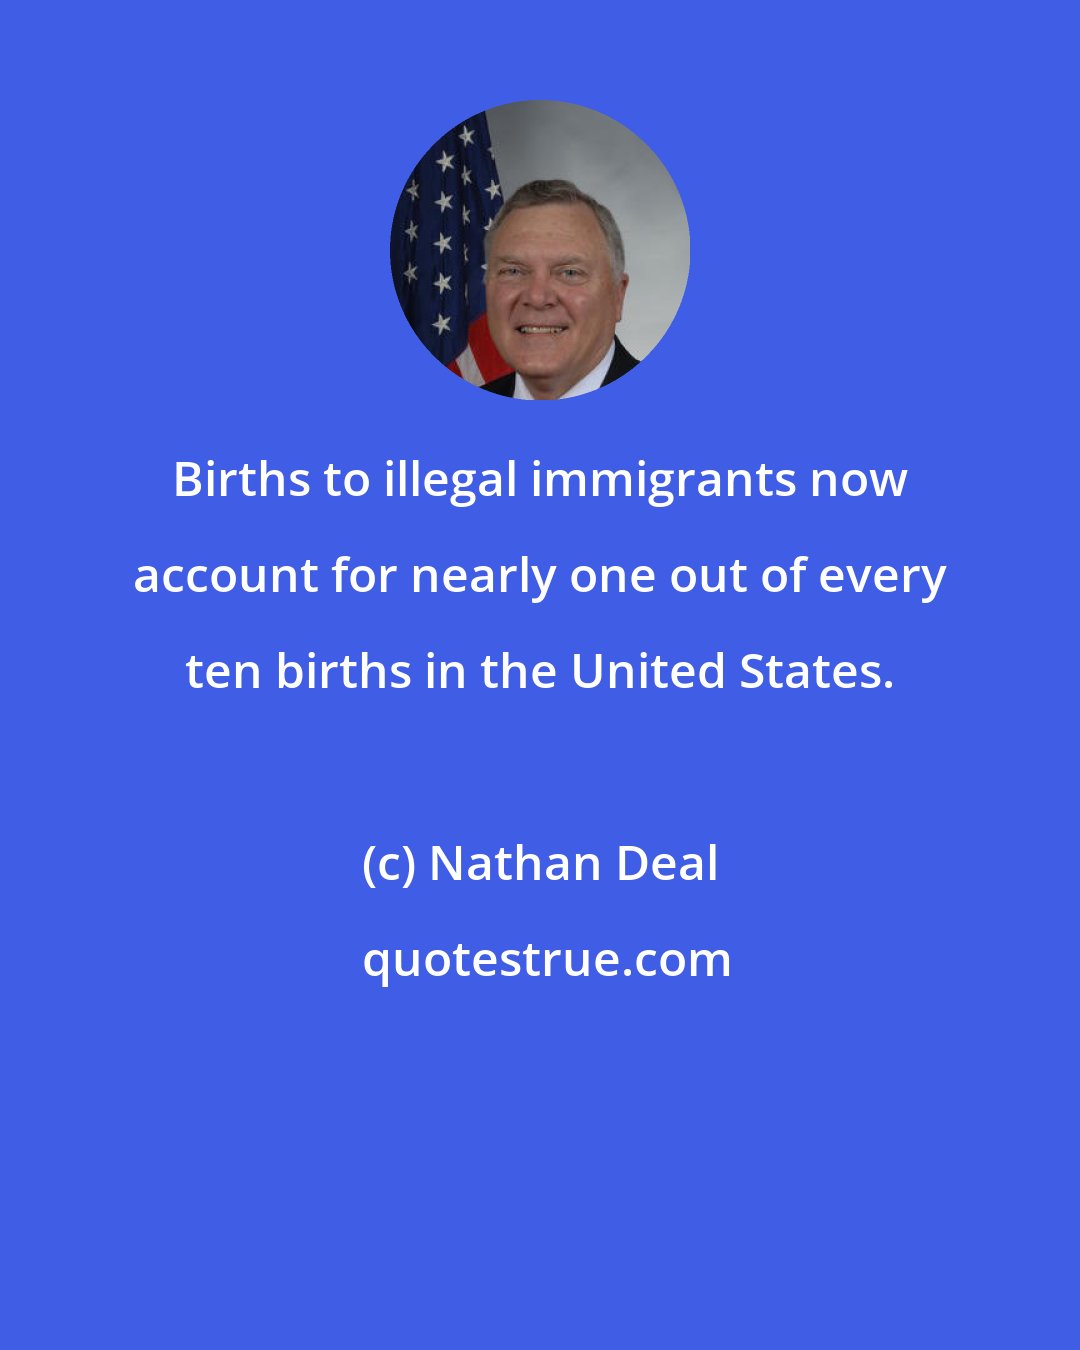 Nathan Deal: Births to illegal immigrants now account for nearly one out of every ten births in the United States.